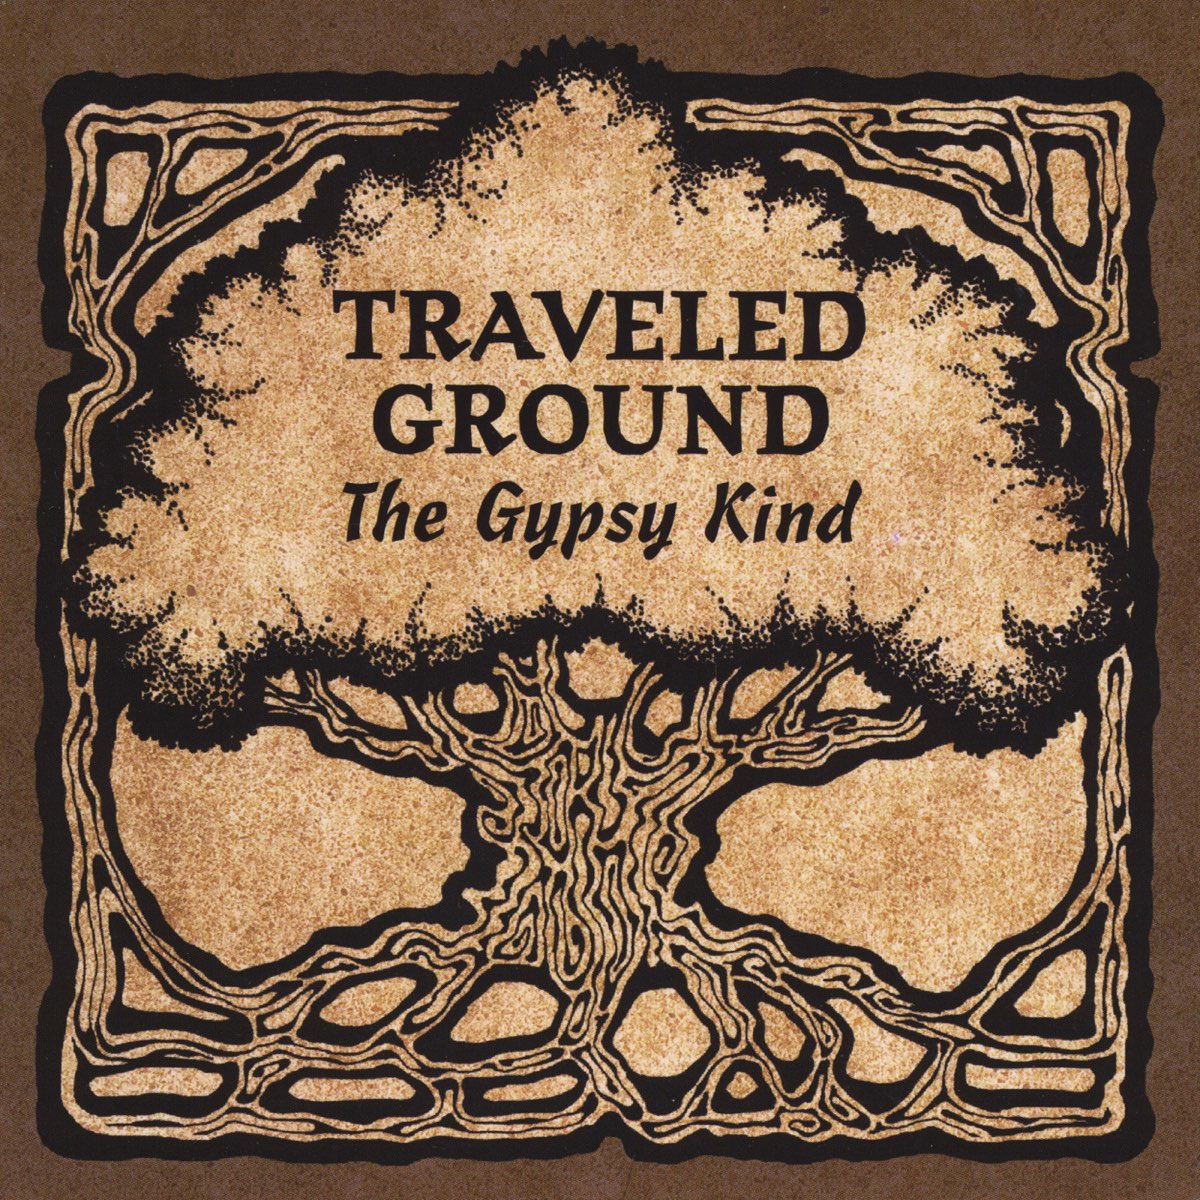 The traveling kind. Grounded travellers.